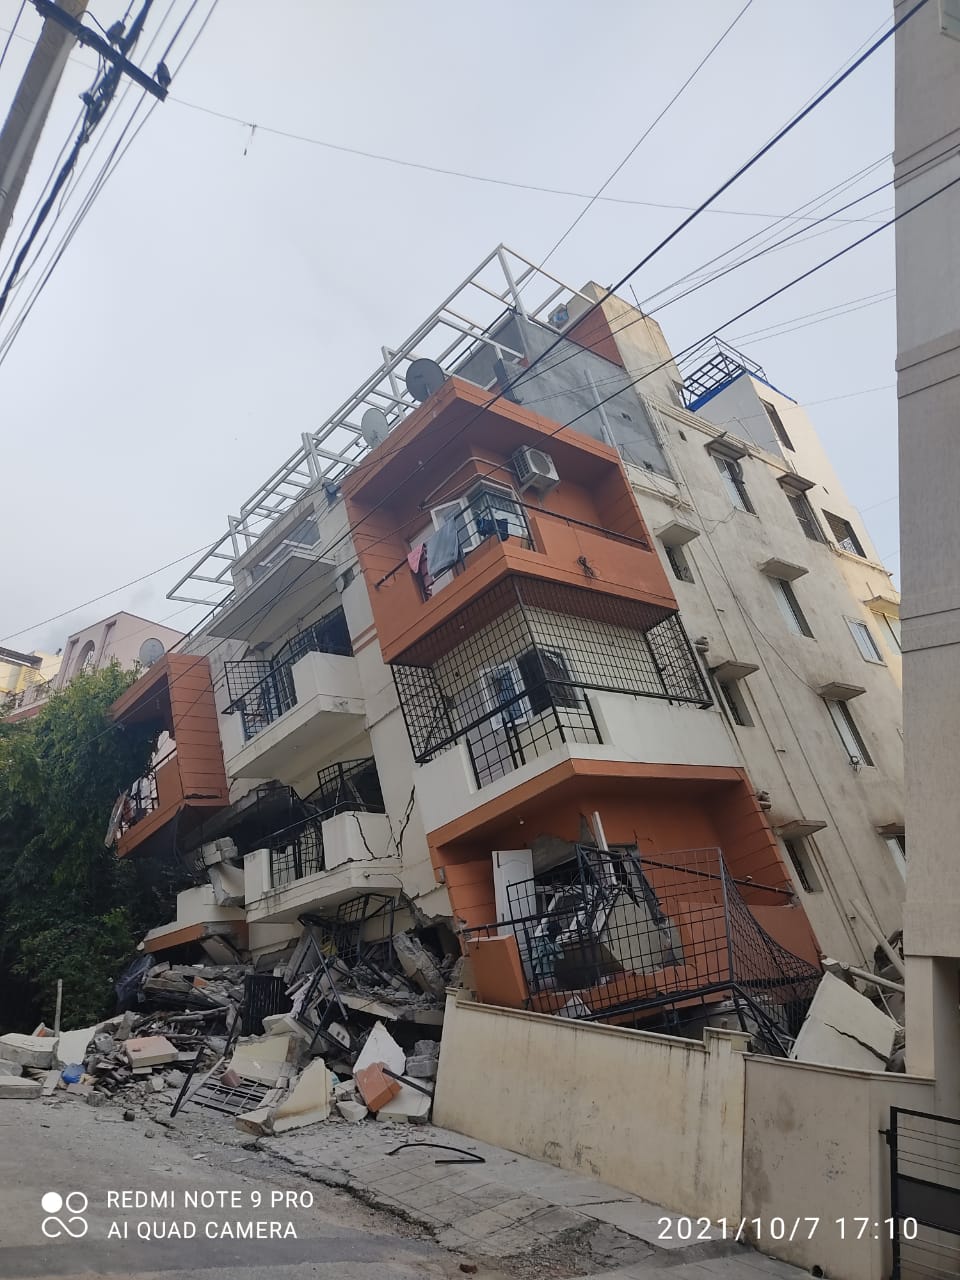 Another three-storey building collapses in Bengaluru